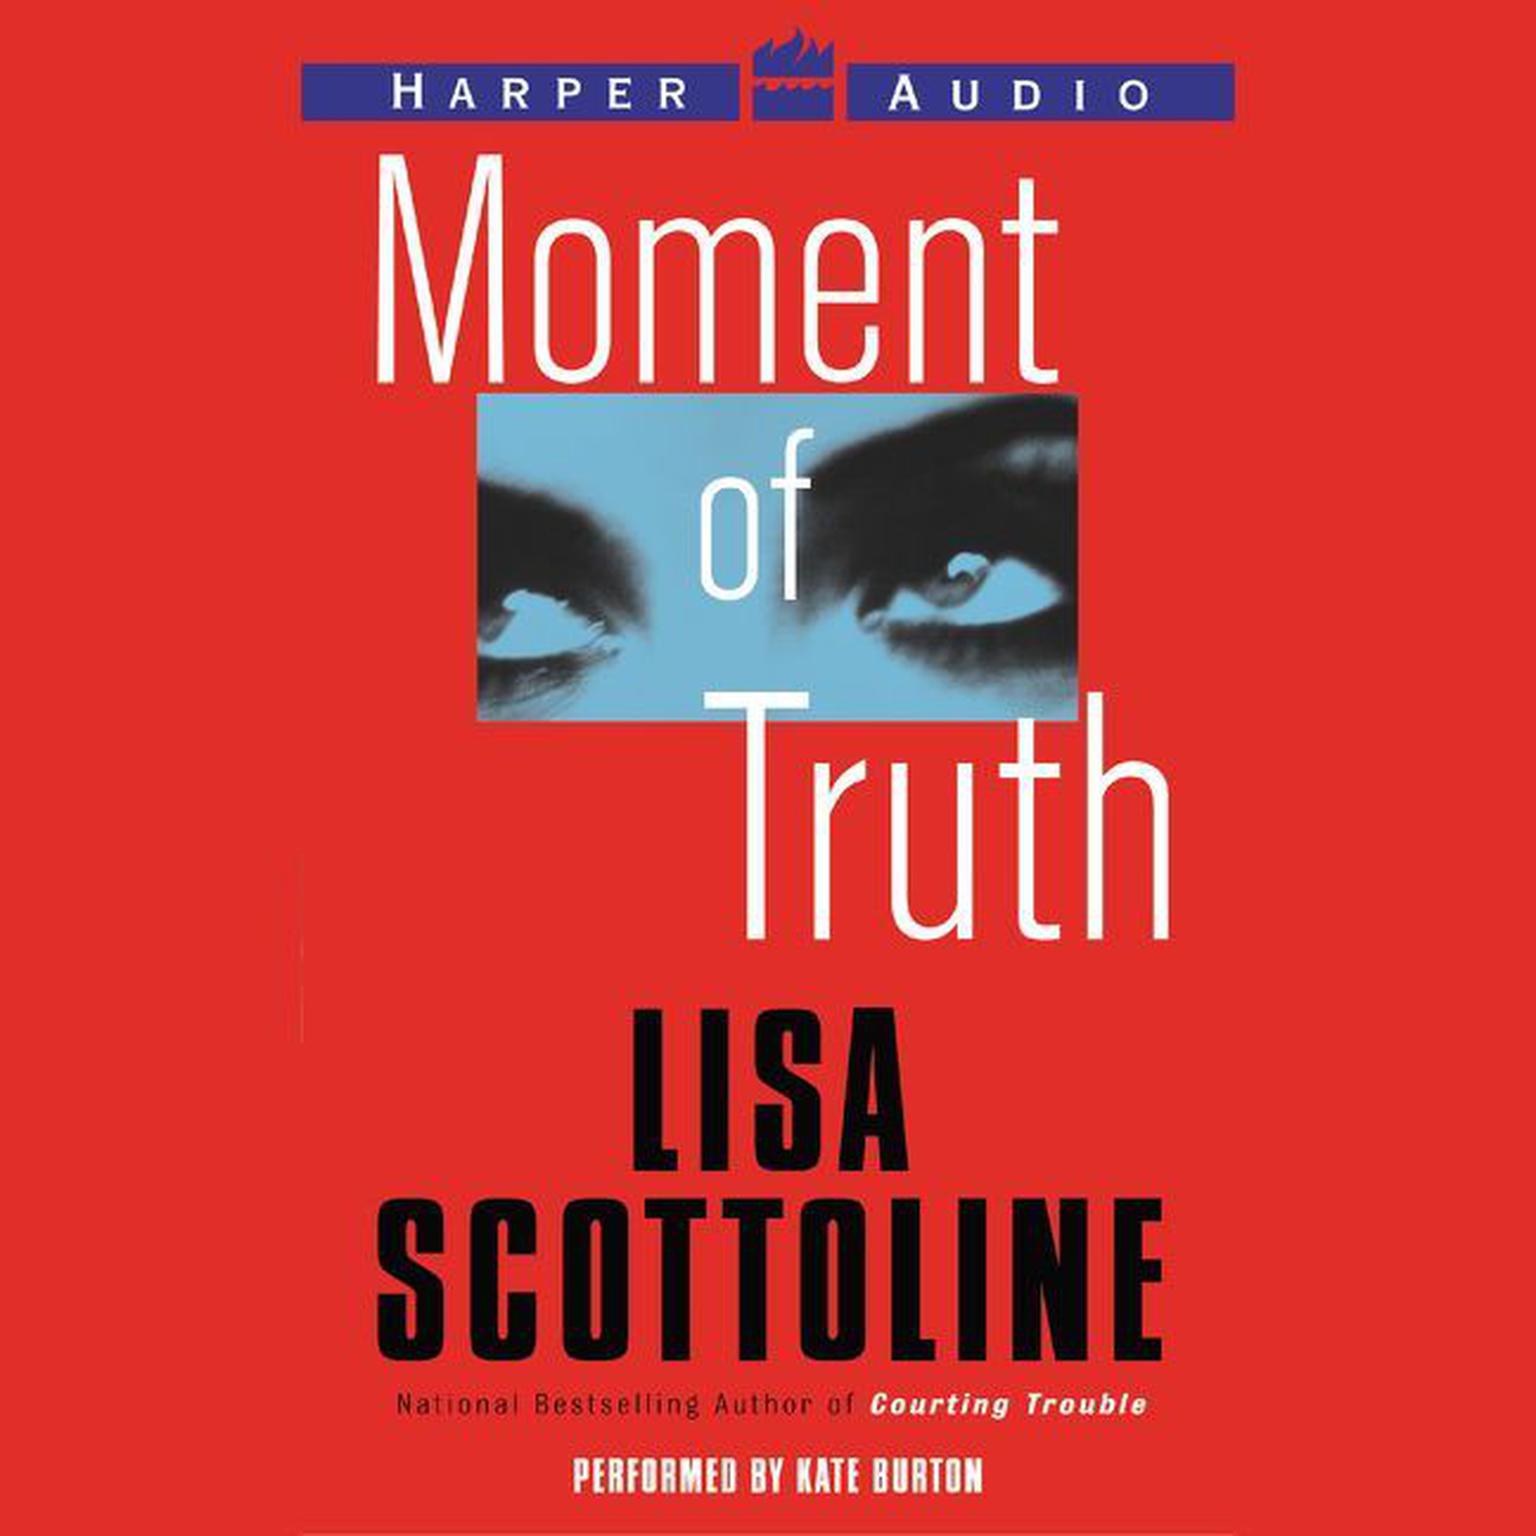 Moment of Truth (Abridged) Audiobook, by Lisa Scottoline